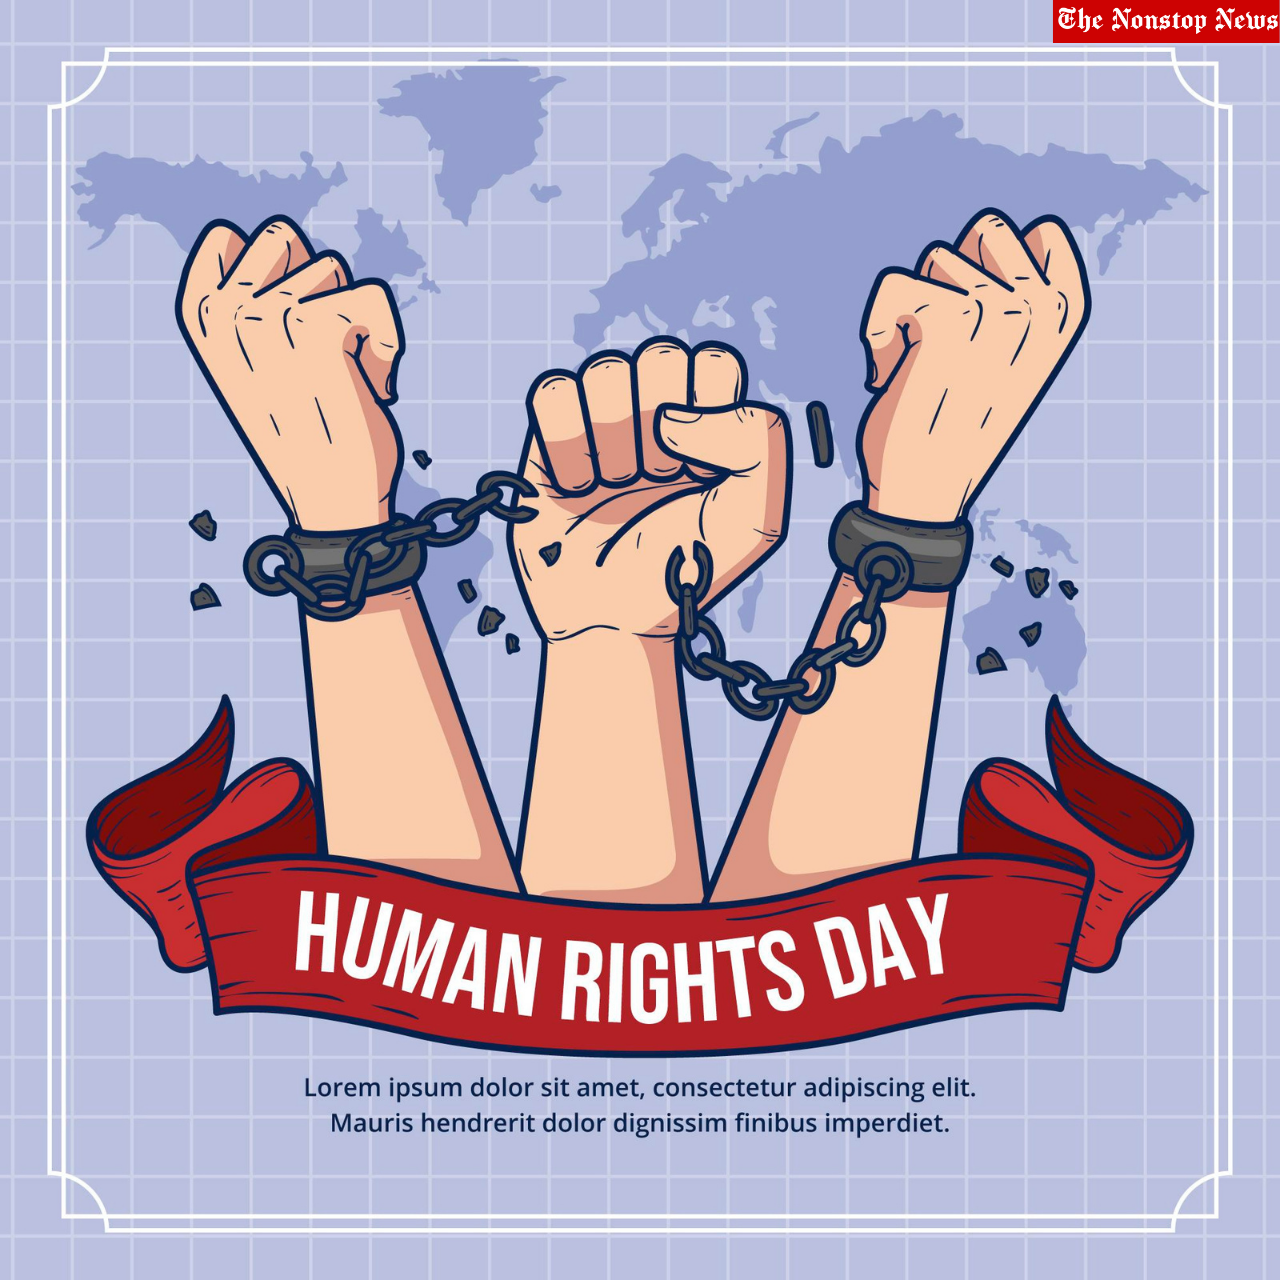 Human Rights Day 2021 Instagram Caption, WhatsApp Status, Poster, Banner, Facebook Messages, Twitter Greetings, and Social Media Posts